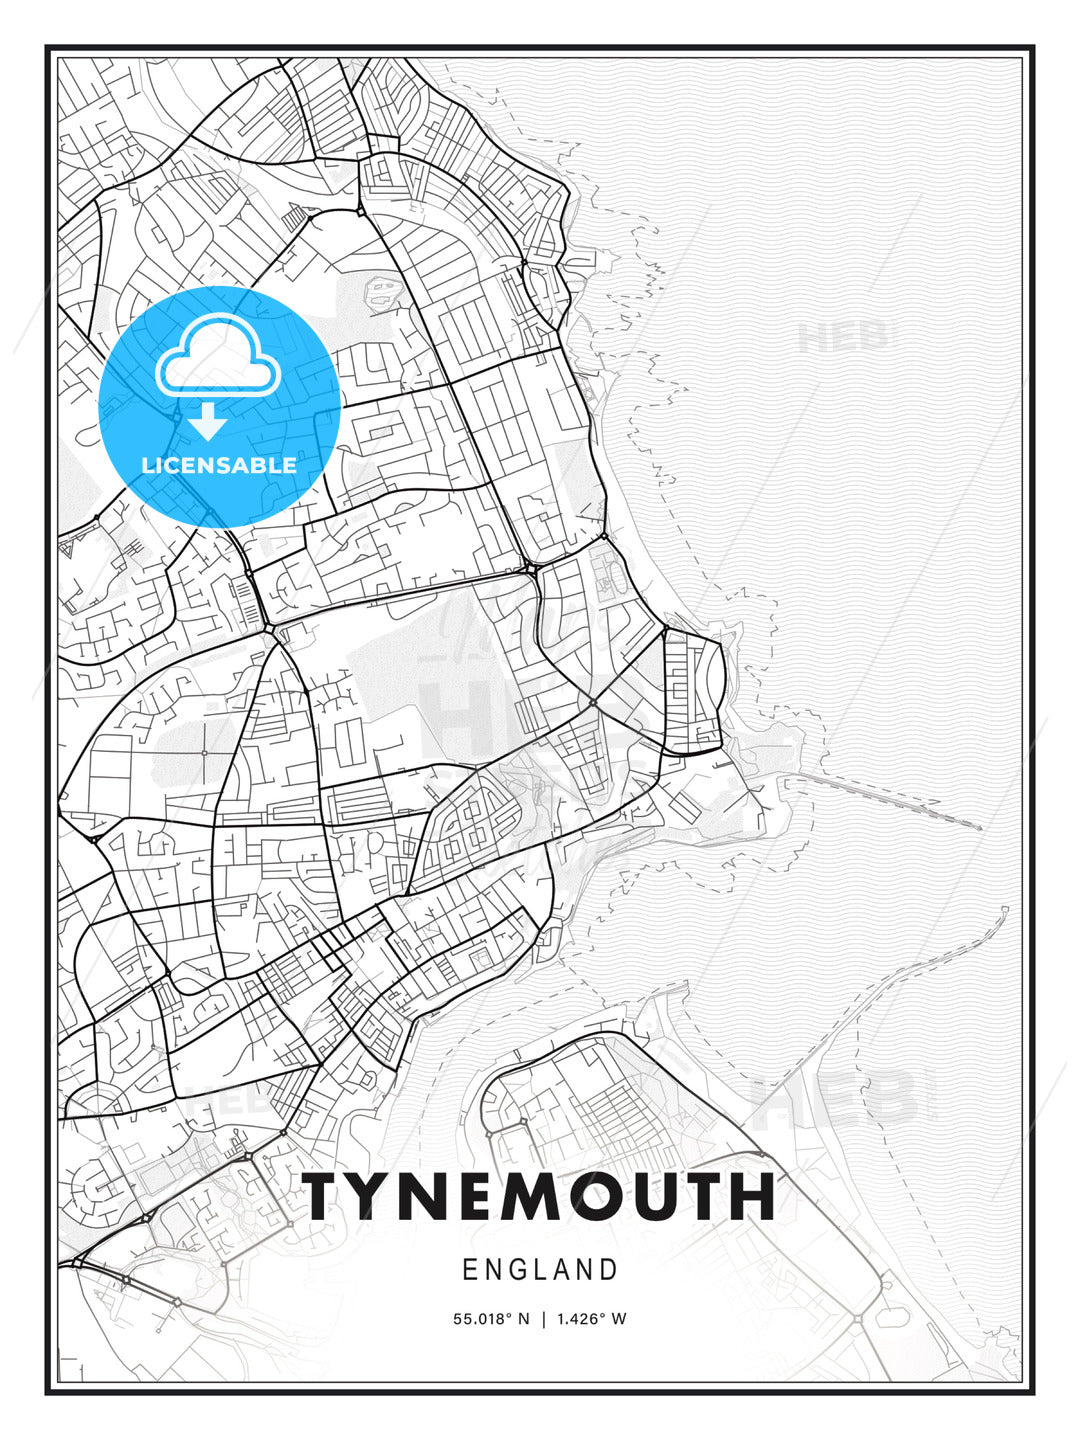 Tynemouth, England, Modern Print Template in Various Formats - HEBSTREITS Sketches